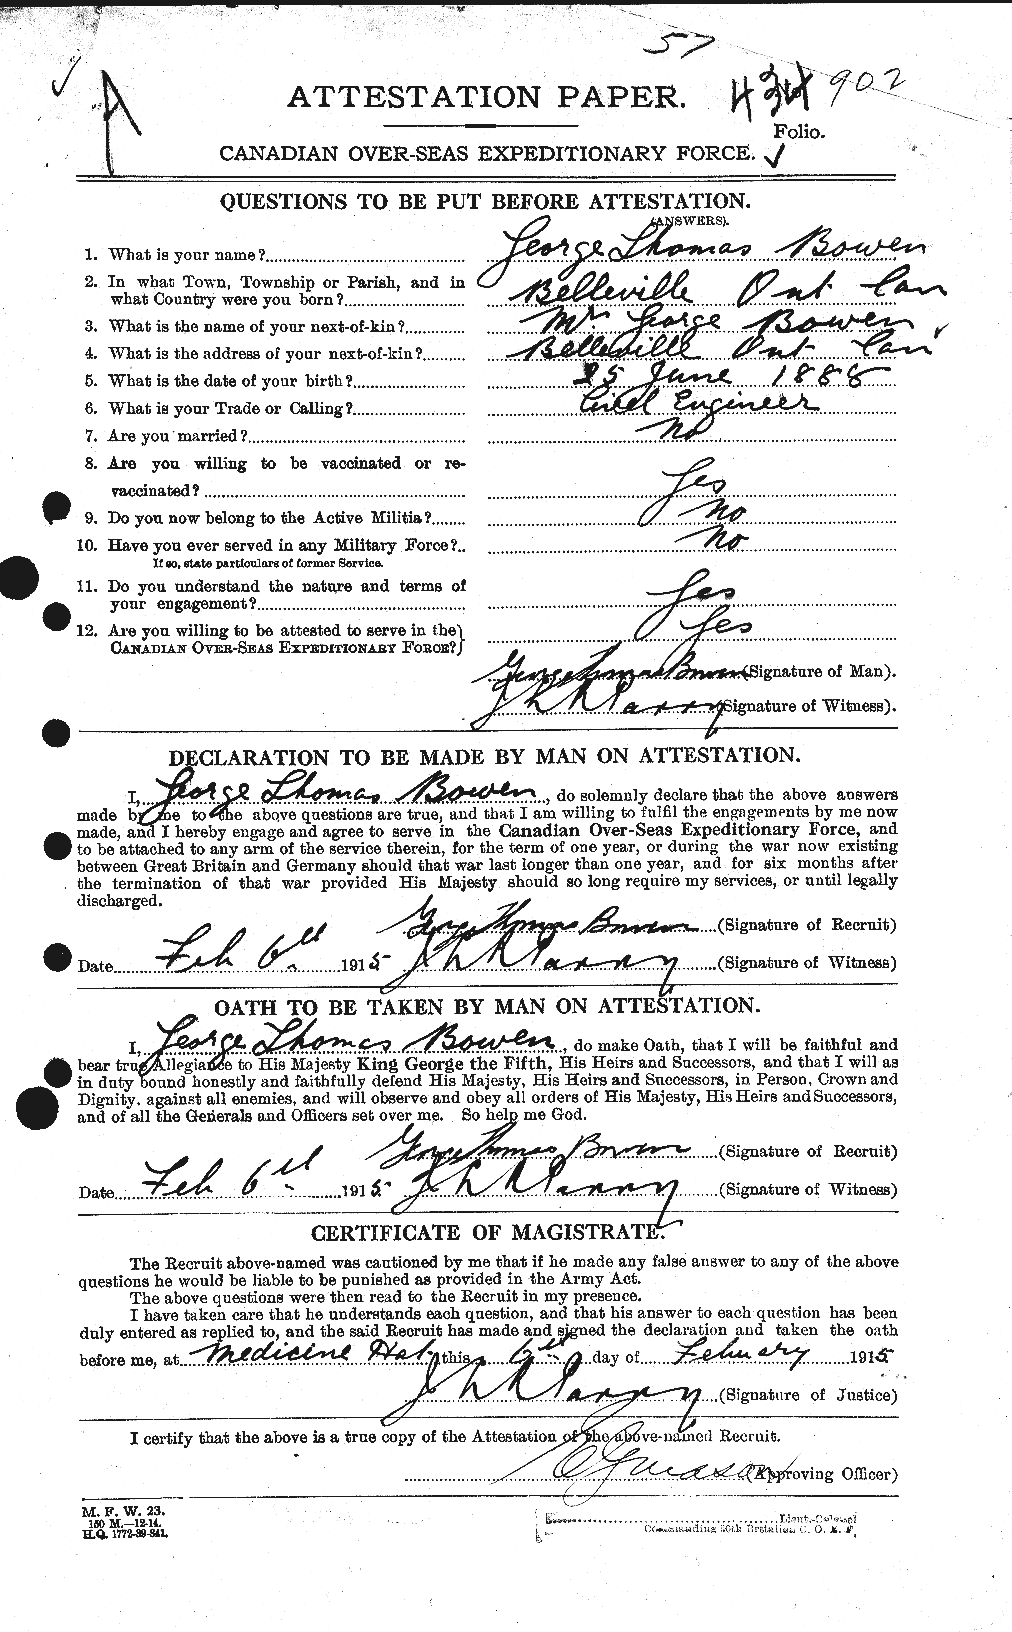 Personnel Records of the First World War - CEF 255403a